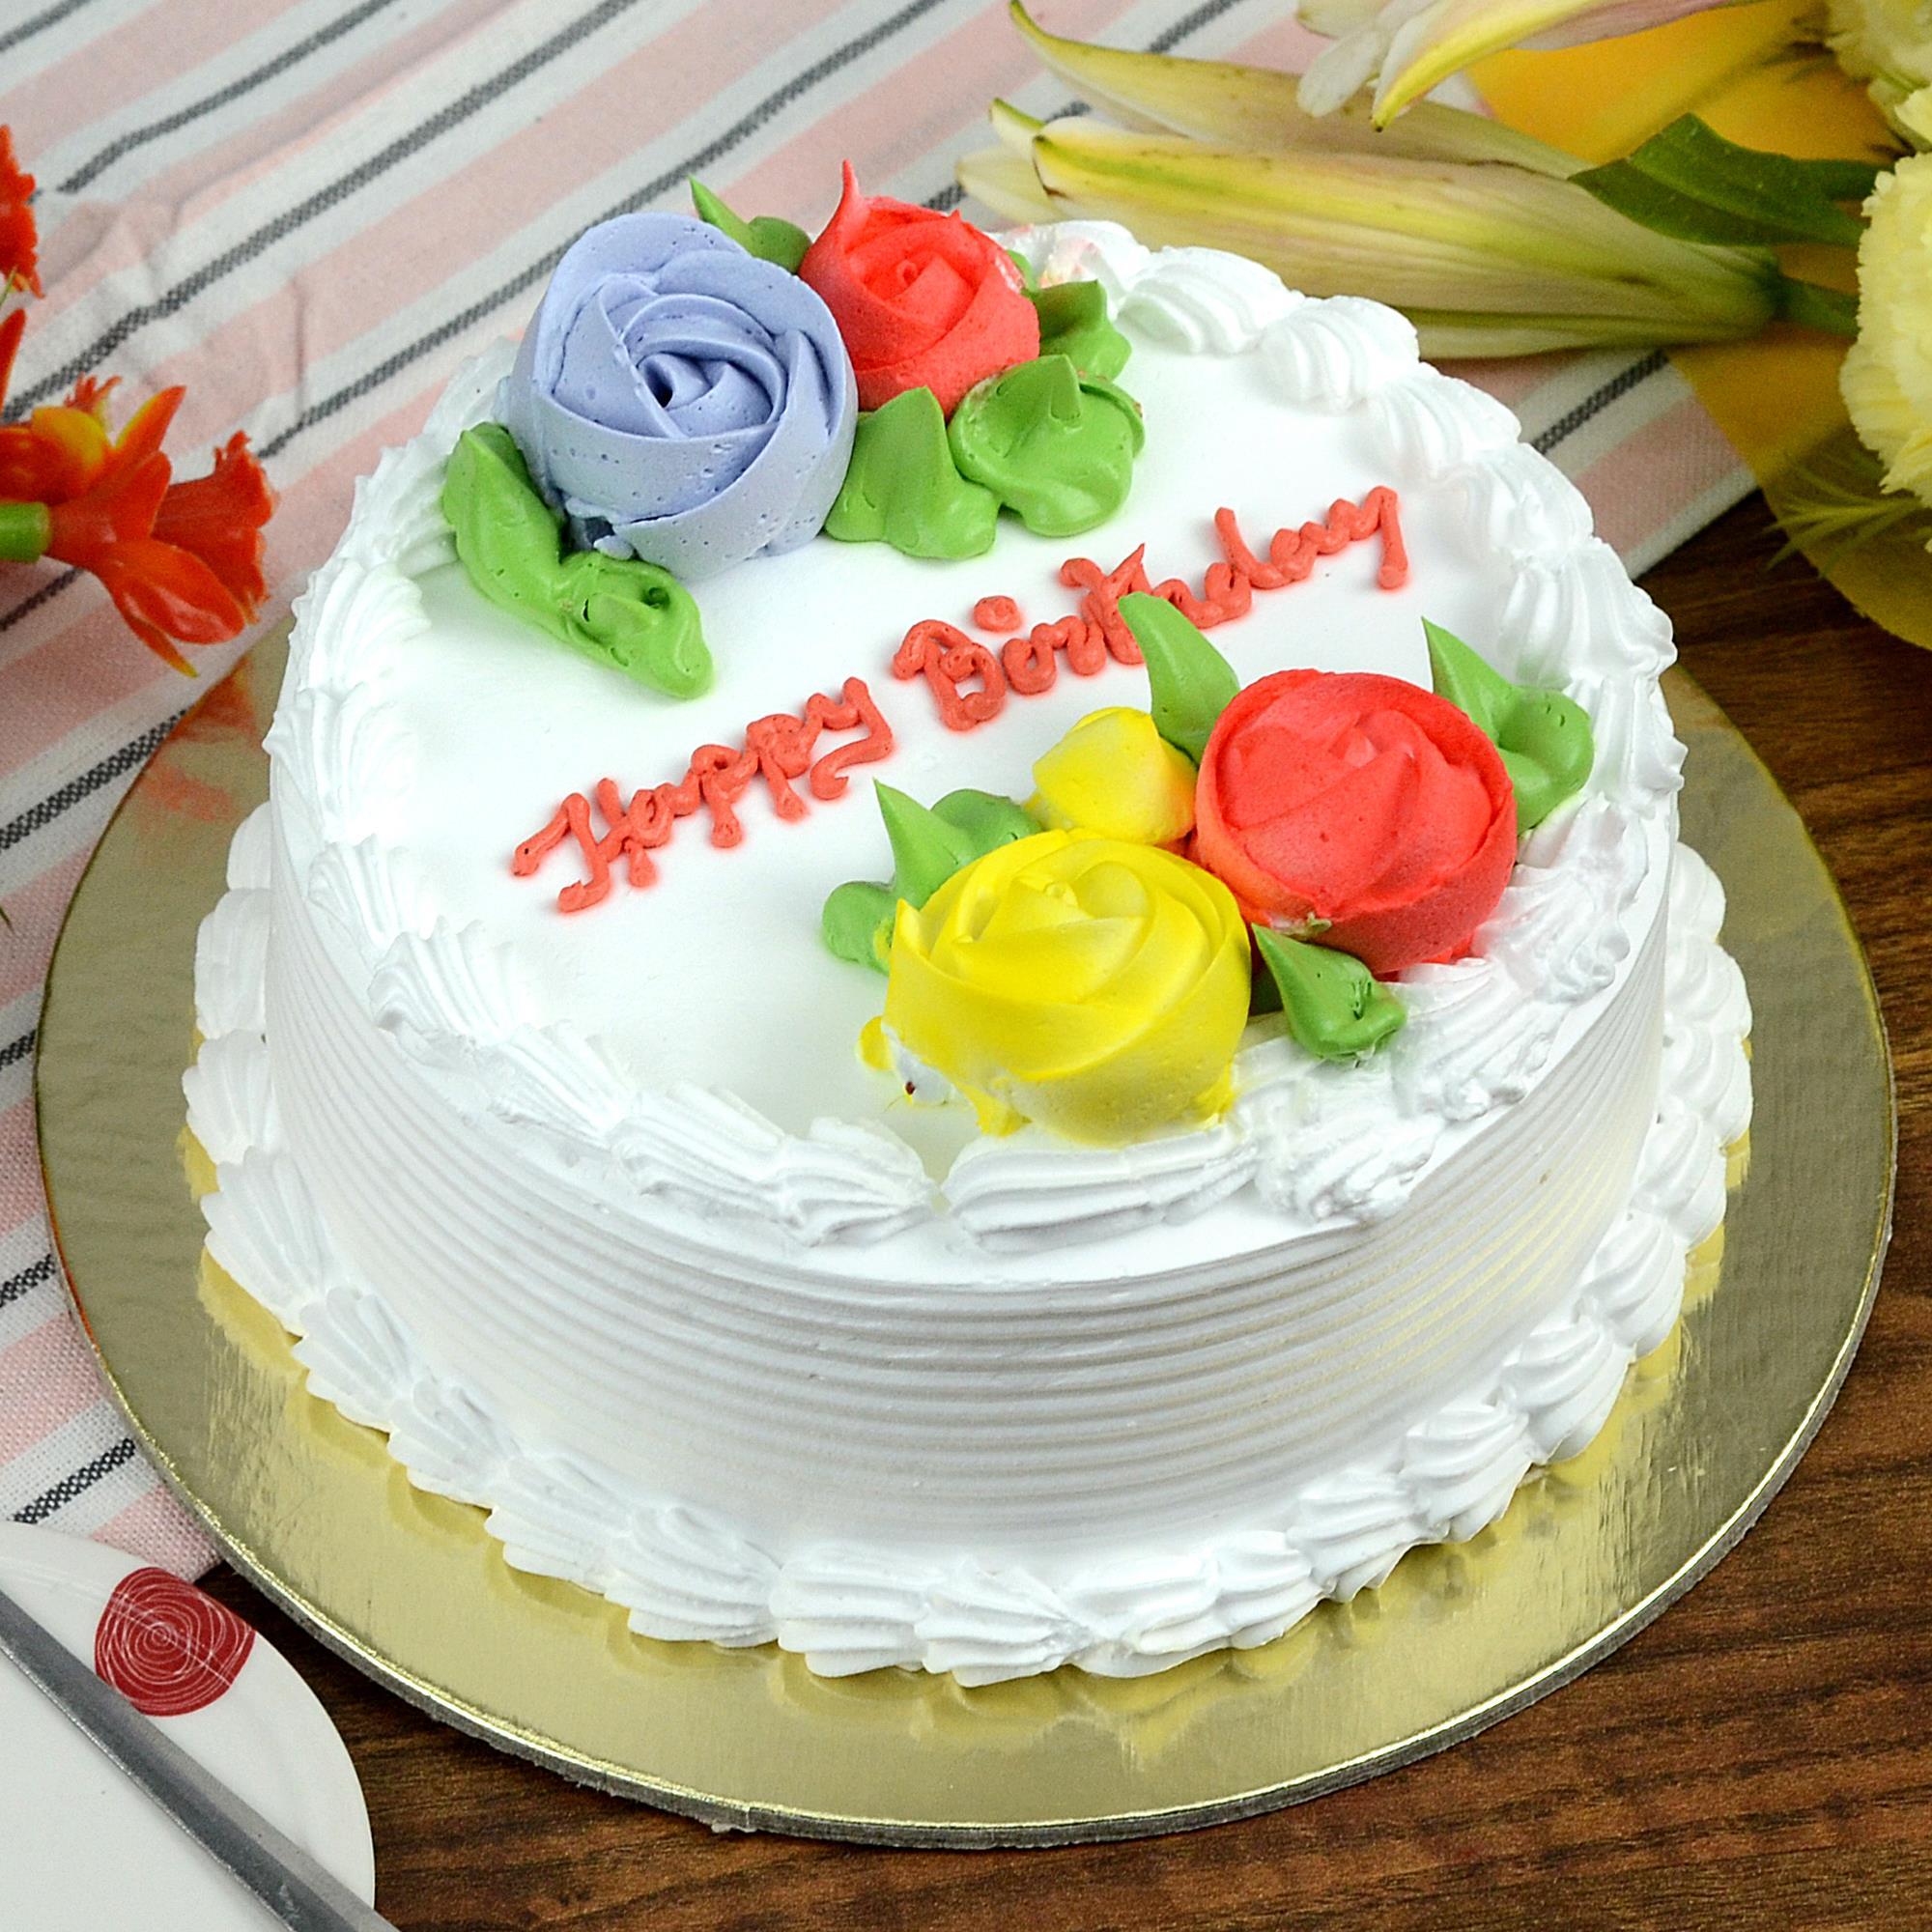 Bigwishbox Special Pineapple Cake Eggless 1 Kg | Fresh Cake | Birthday Cake  | Anniversary Cake | Next Day Delivery : Amazon.in: Grocery & Gourmet Foods